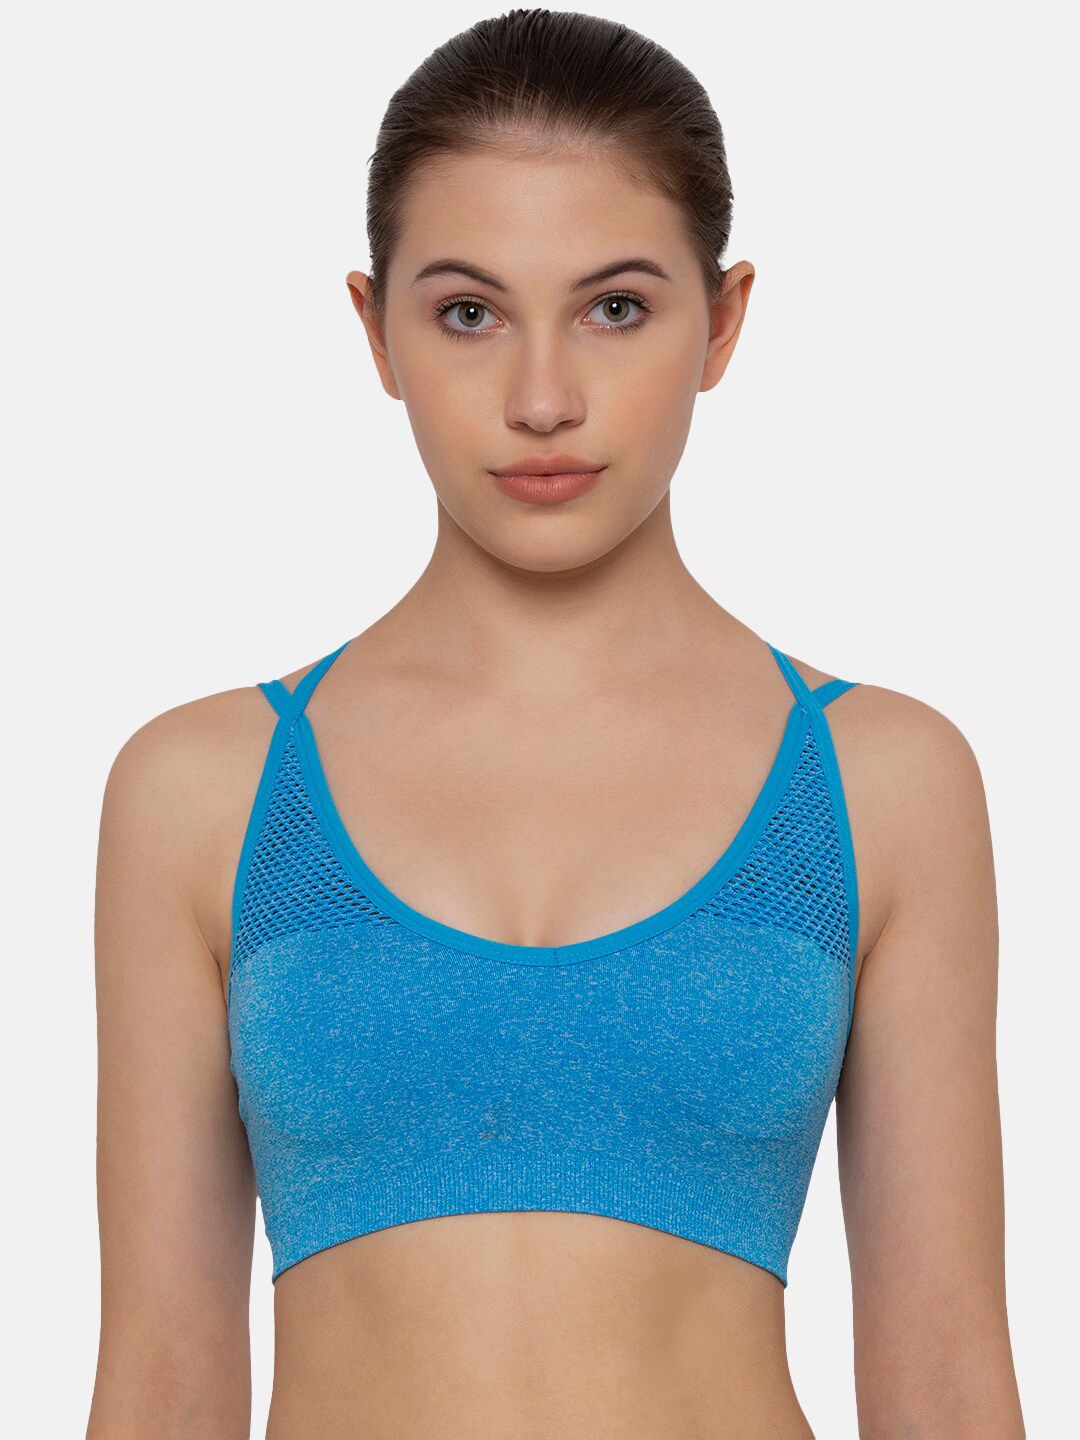 Triumph Triaction Zen Top Padded Non Wired Sports Bra Price in India